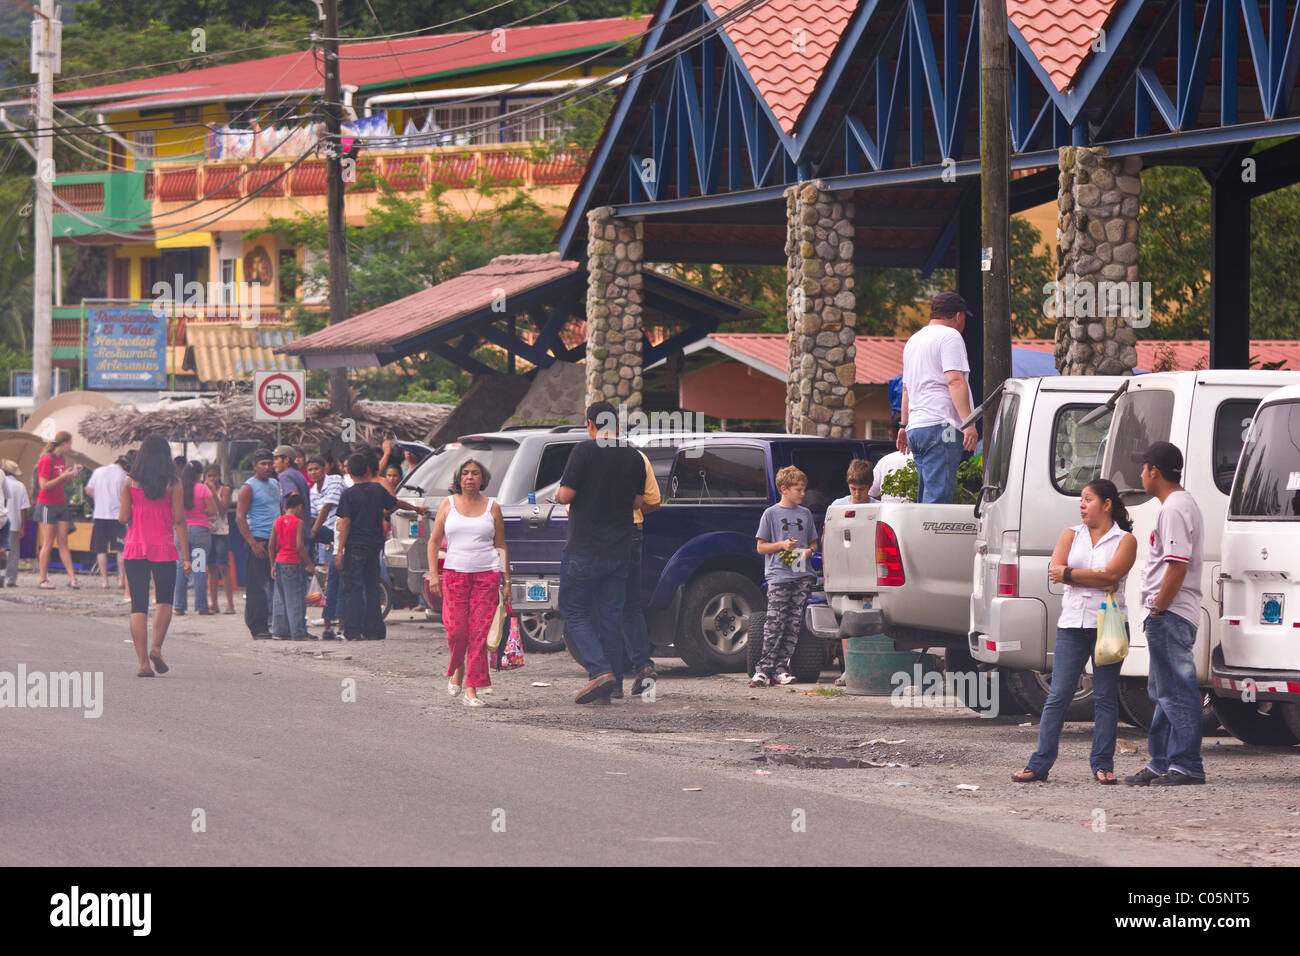 EL VALLE de ANTON, PANAMA - People and cars in town. Stock Photo